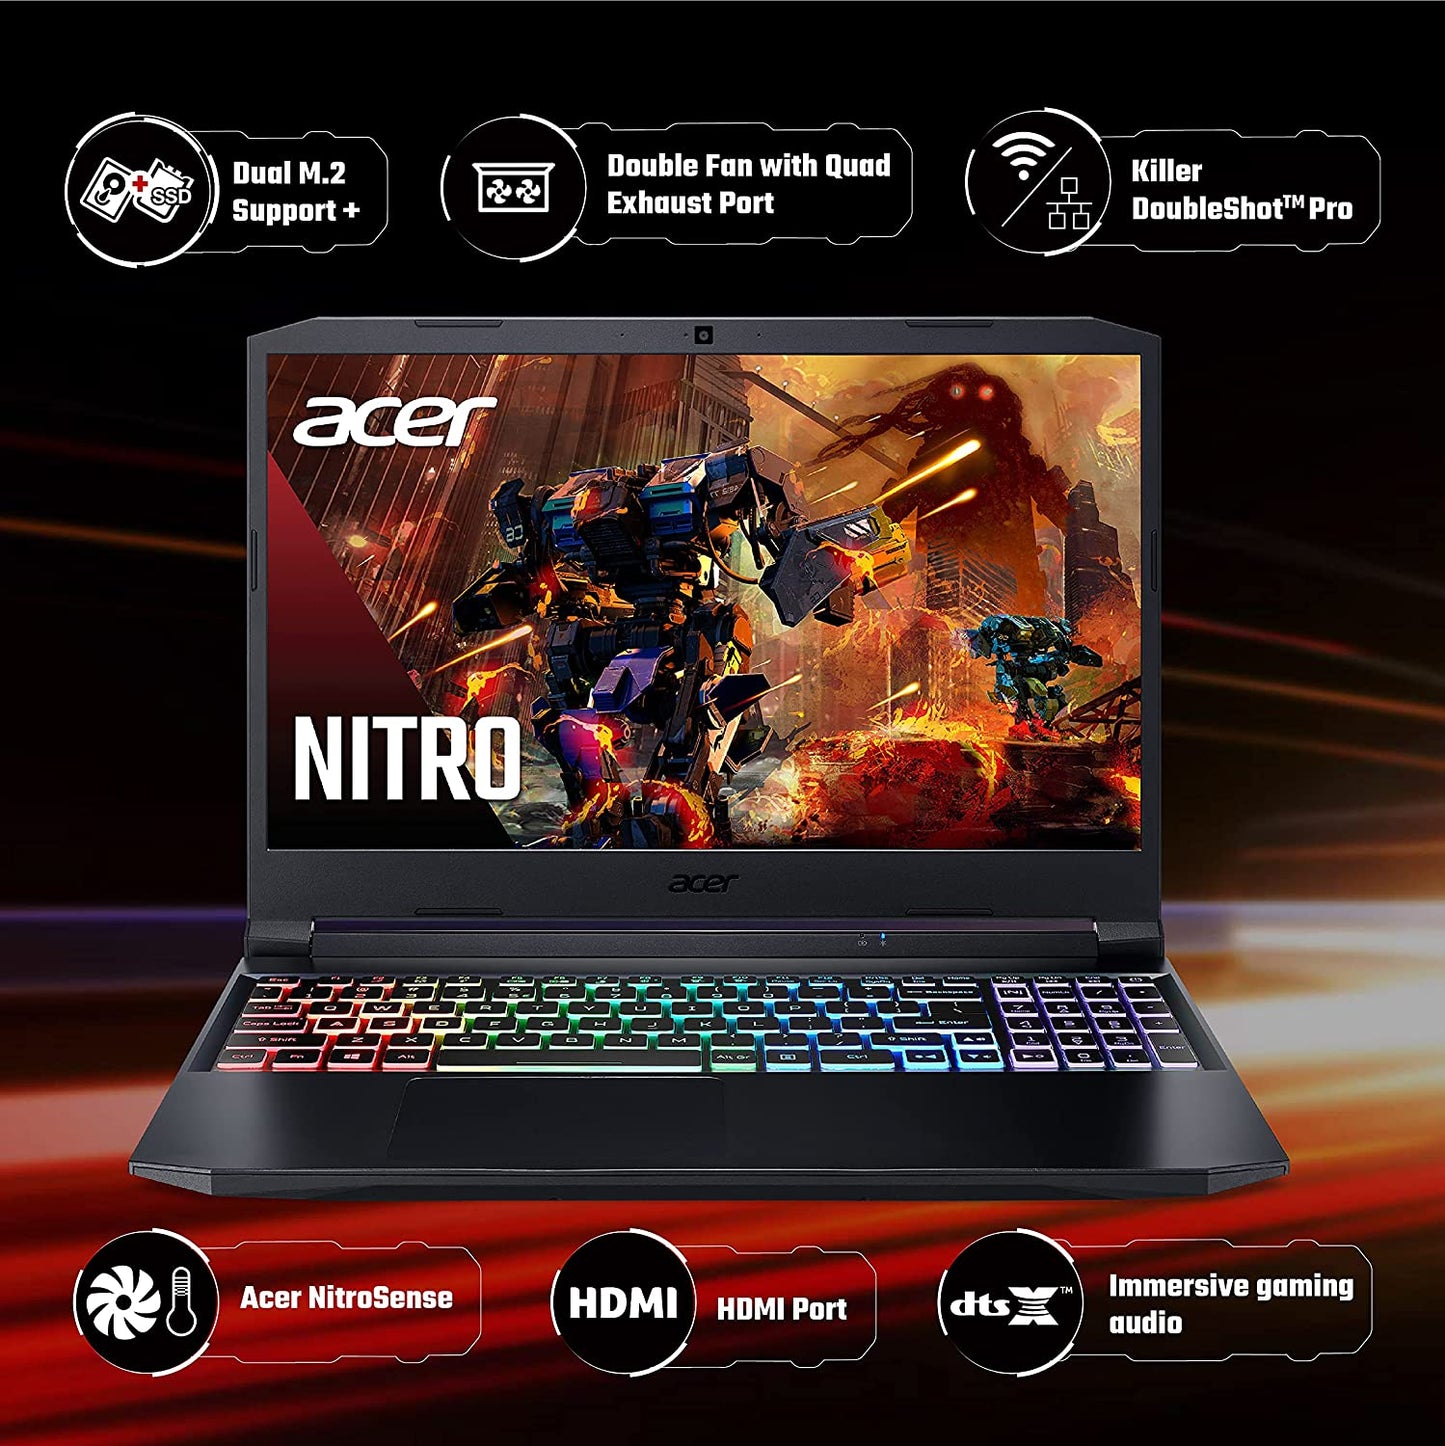 NH.QEHSI.001-Acer Nitro 5 gaming laptop Intel core i5 11th Gen (Windows 11 Home/8 GB/512 GB SSD/ NVIDIA® GeForce GTX 1650/144hz) AN515-57 with 39.6 cm (15.6 inches) IPS display